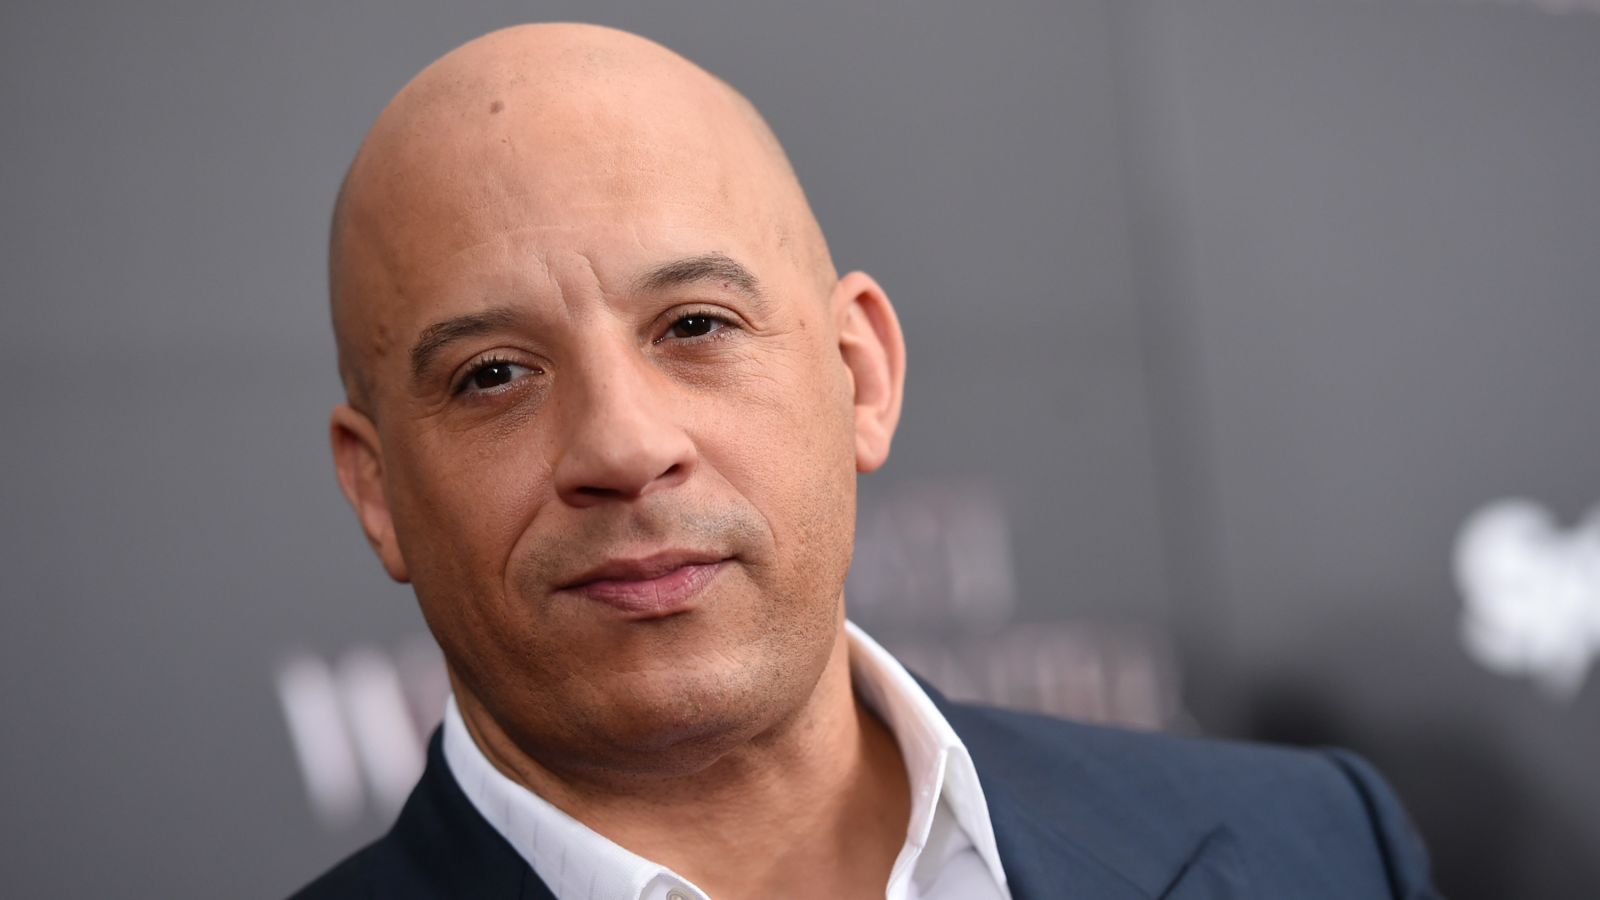 Vin Diesel accused of sexual battery by former assistant in lawsuit ...